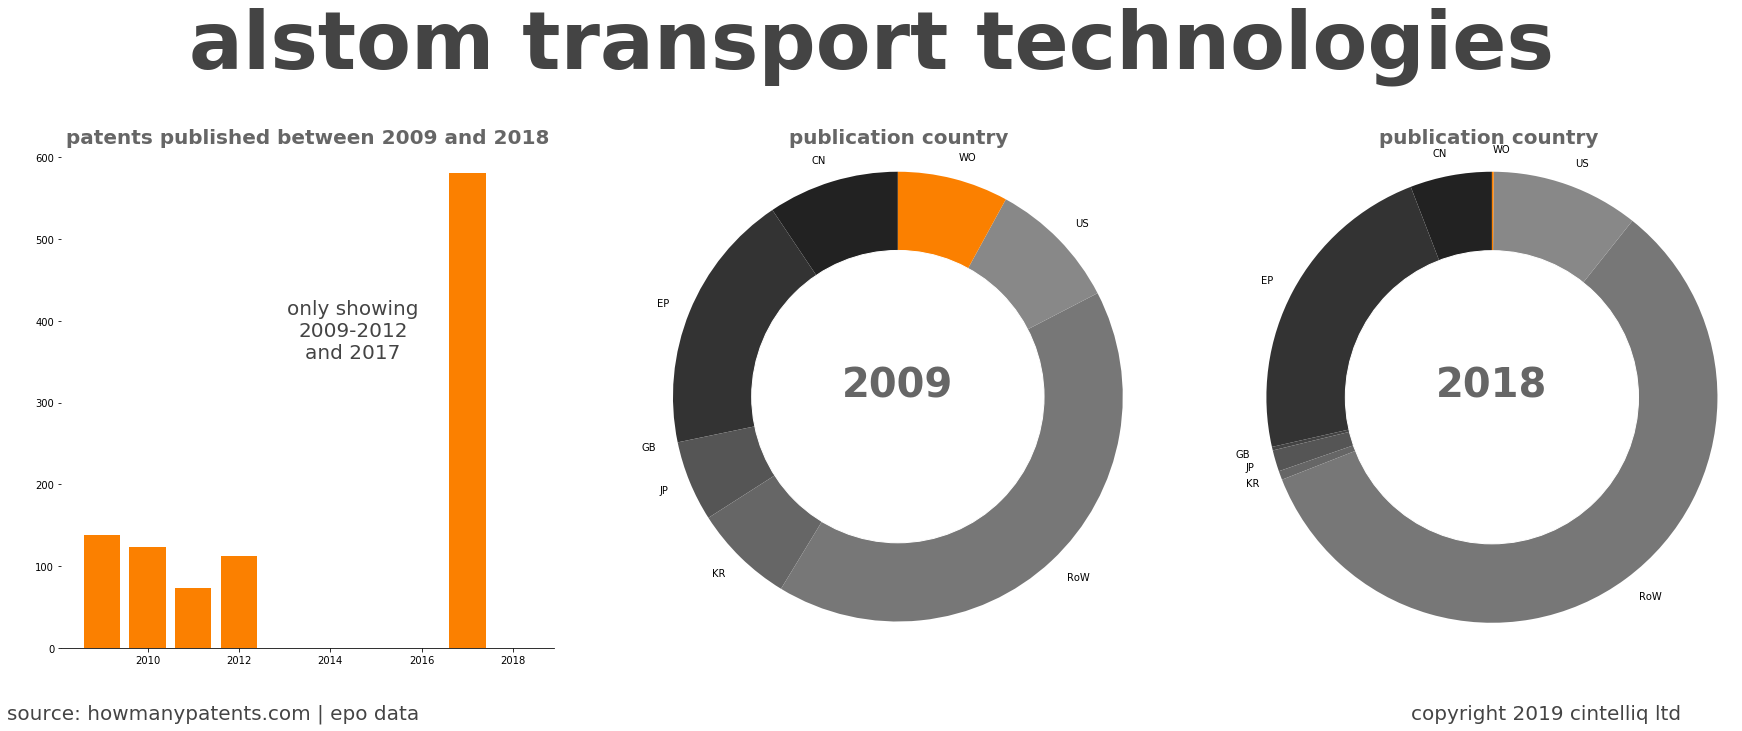 summary of patents for Alstom Transport Technologies